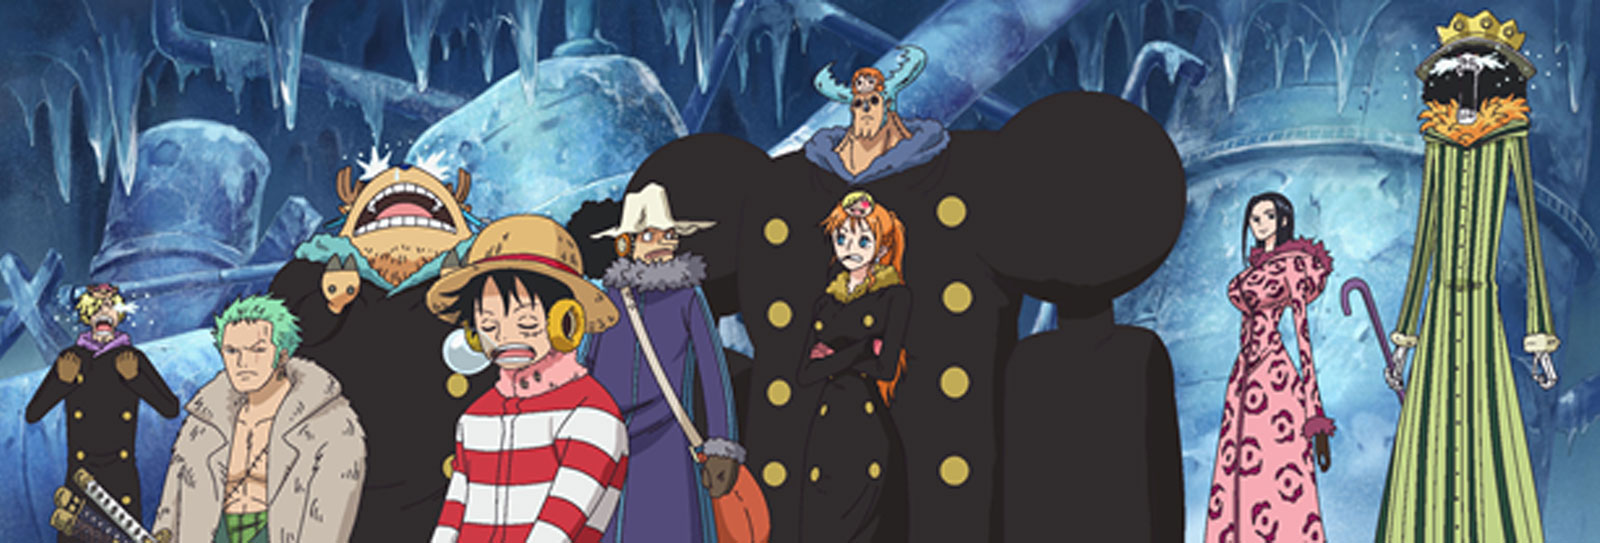 Toei Animation on X: #TBT to ONE PIECE FILM: Z, one of the greatest  adventures for Luffy & the Straw Hat crew! RT if you have seen this full  length feature adventure